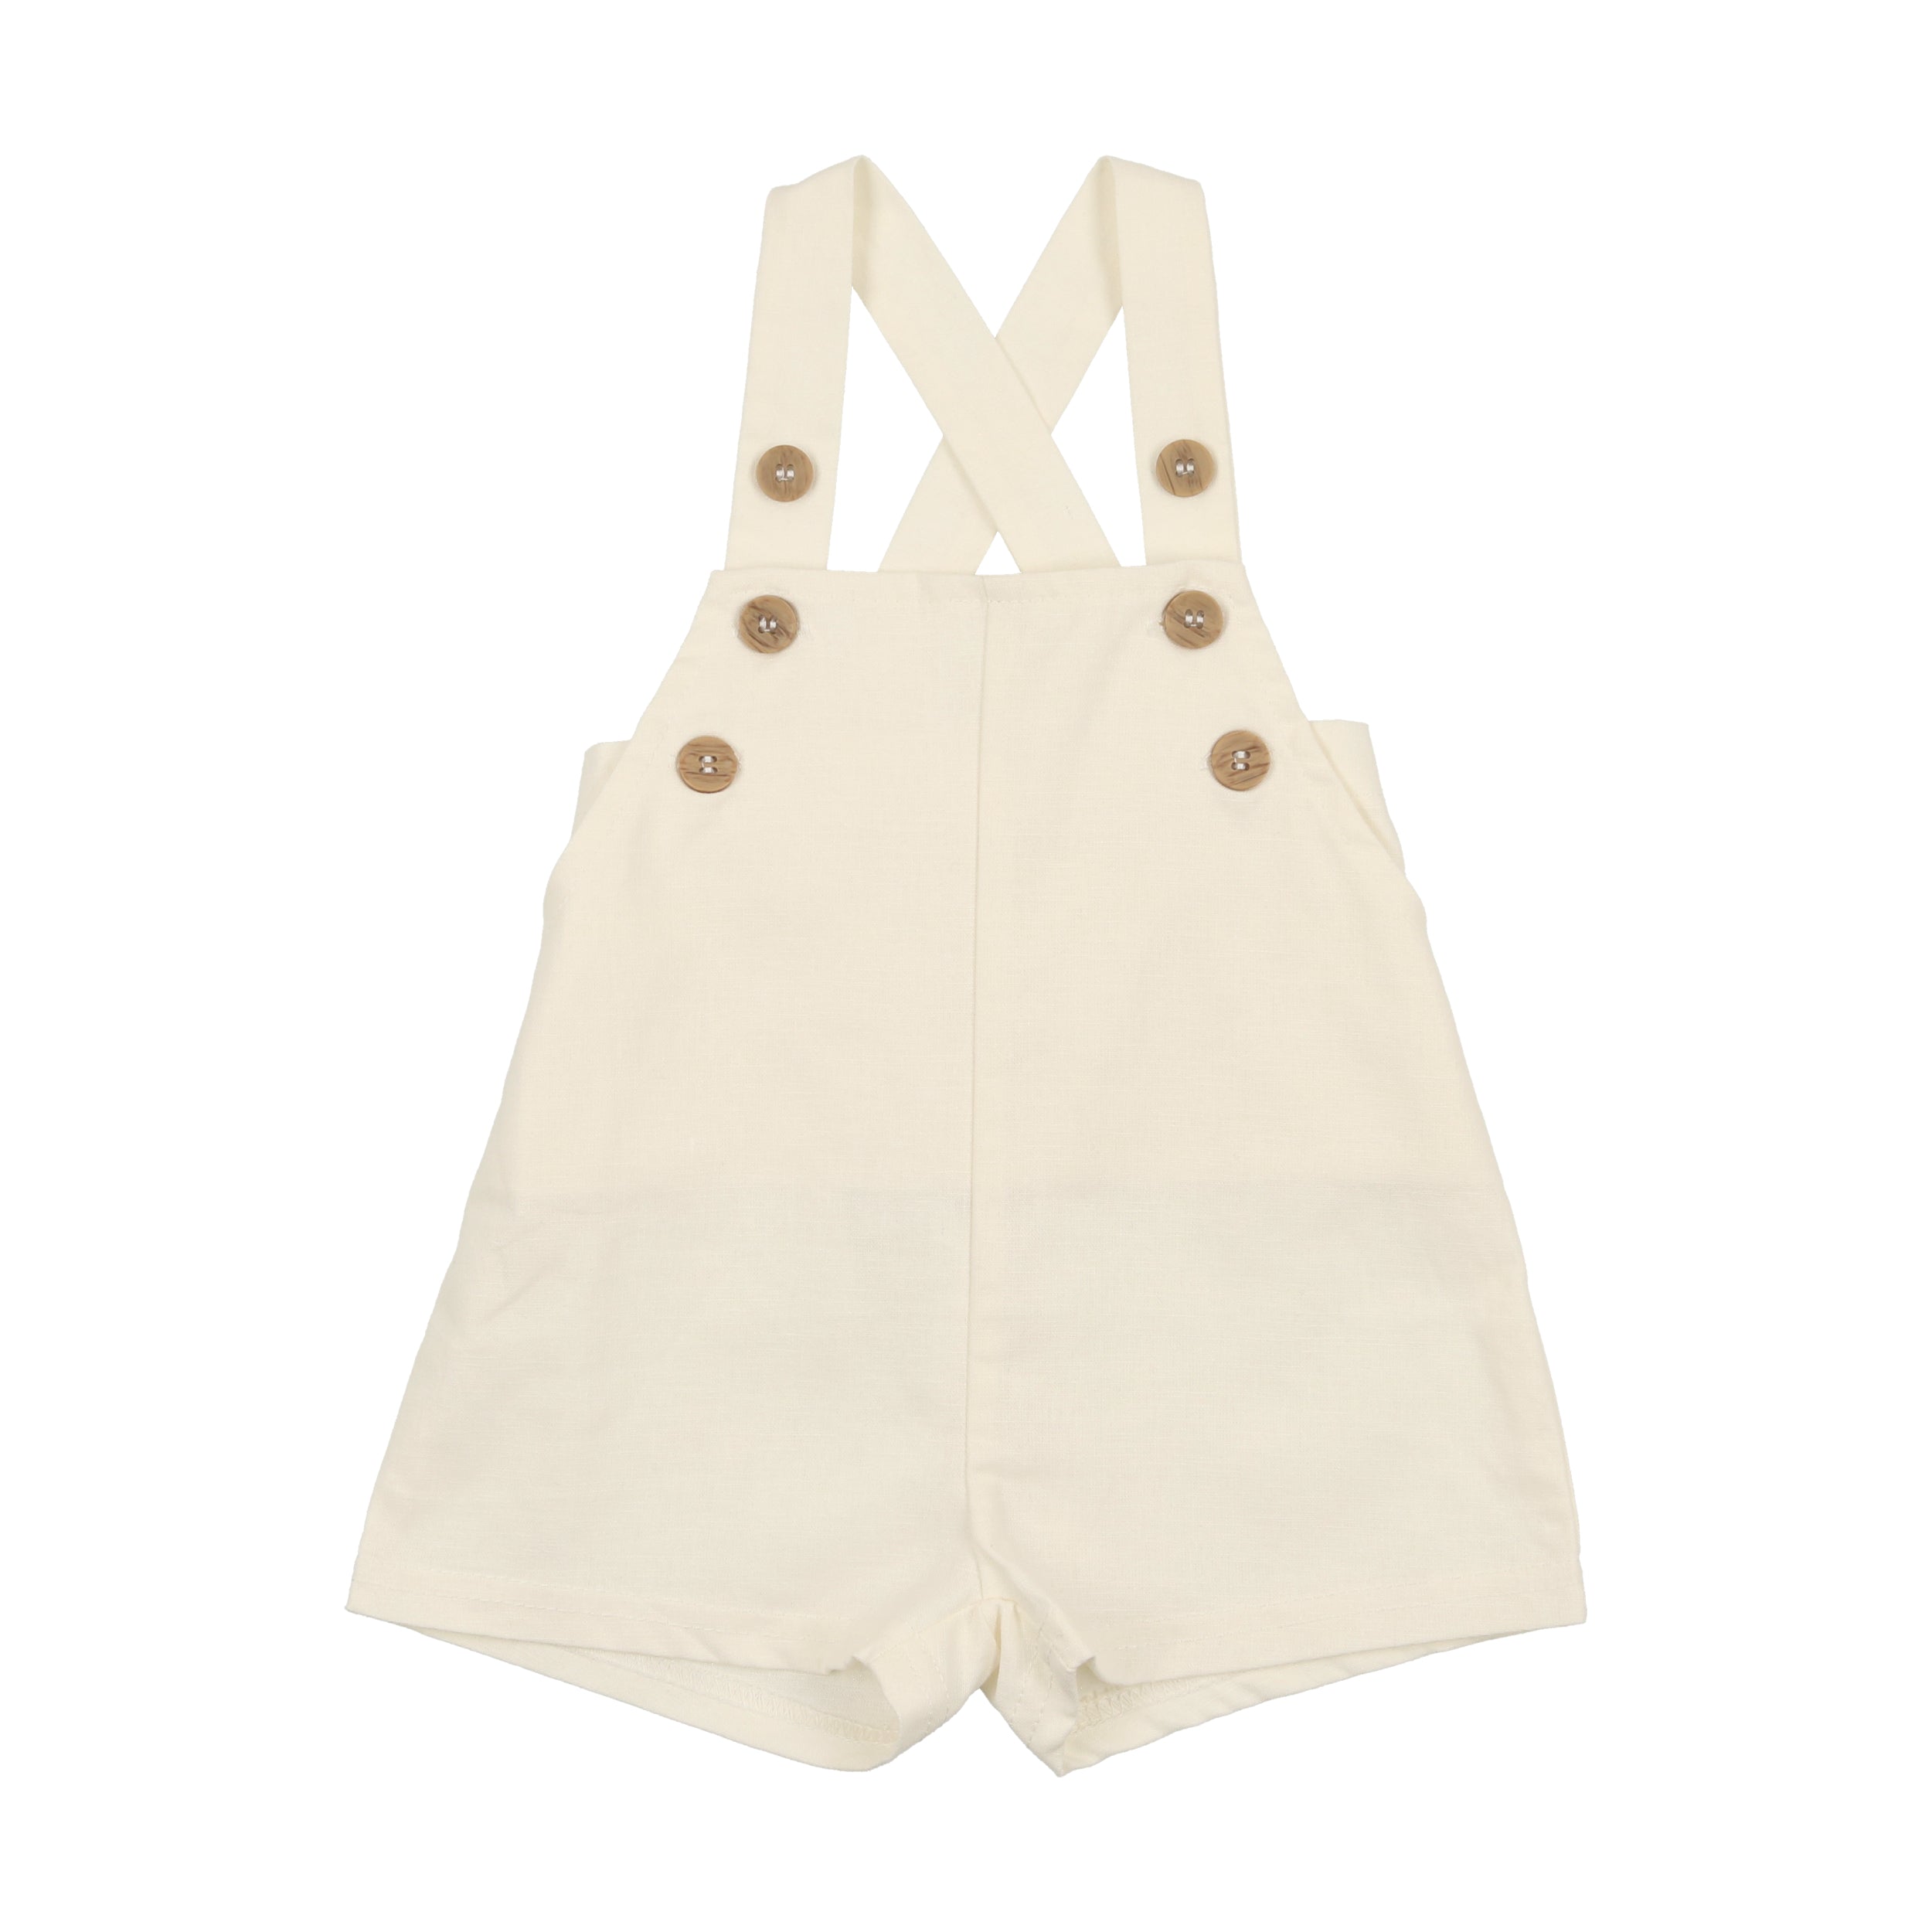 Analogie by Lil Legs Cream Linen Overalls